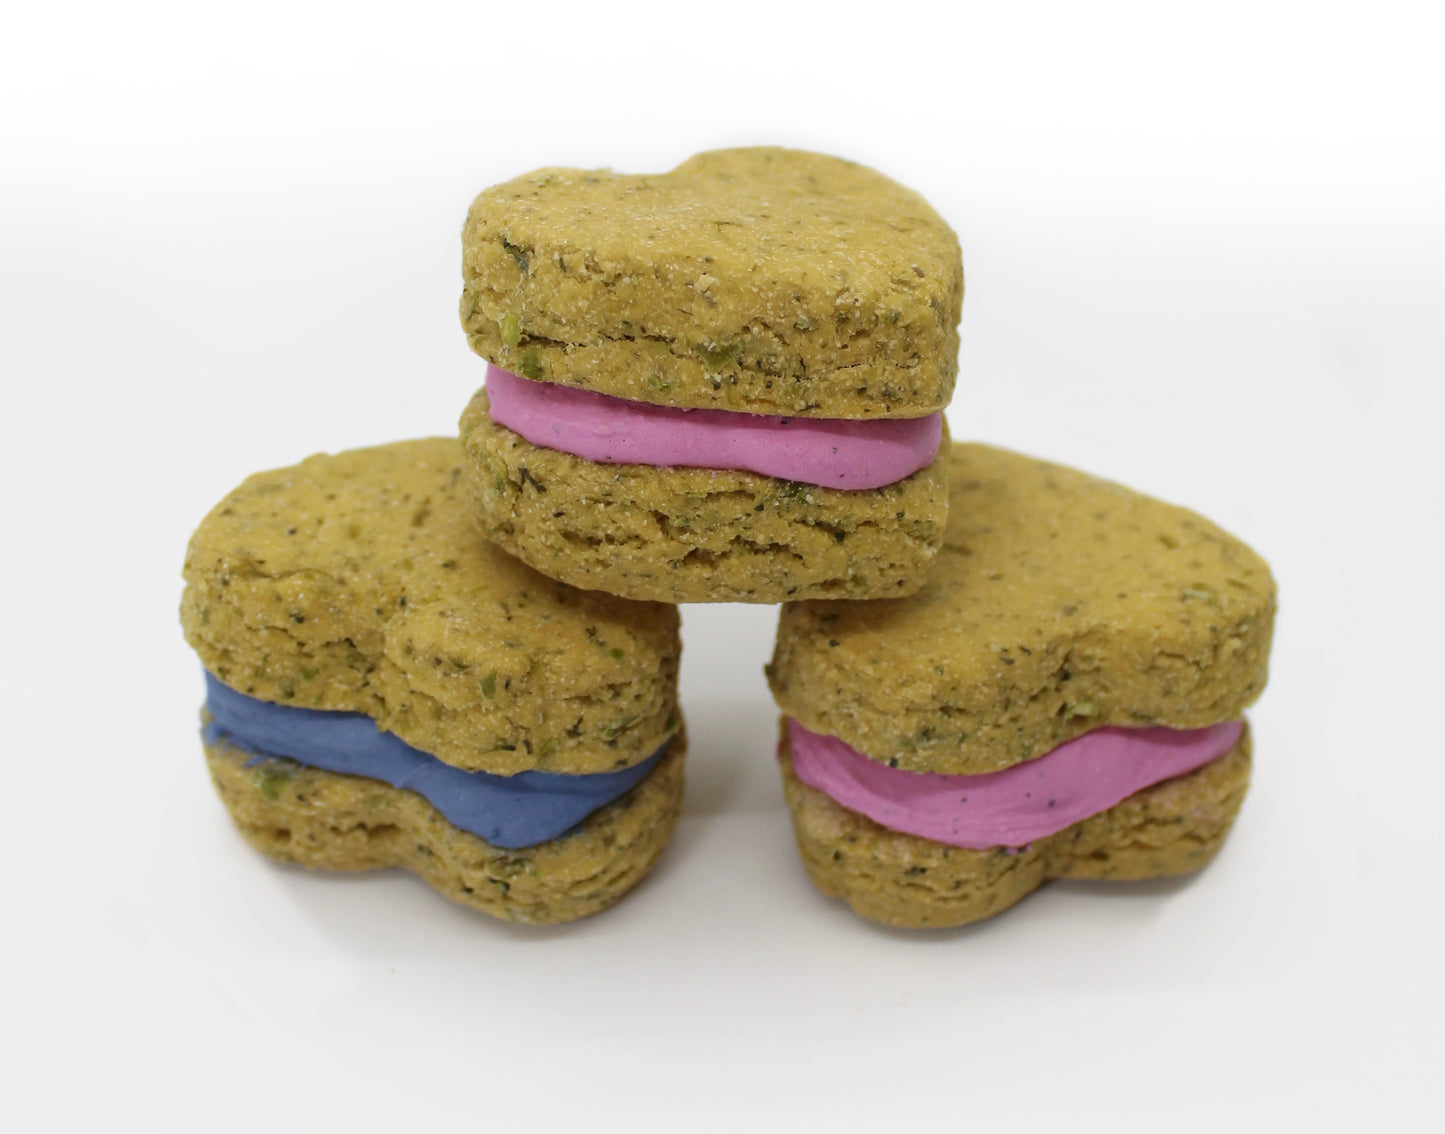 Three green whoopie heart dog treats stacked in a pyramid formation.